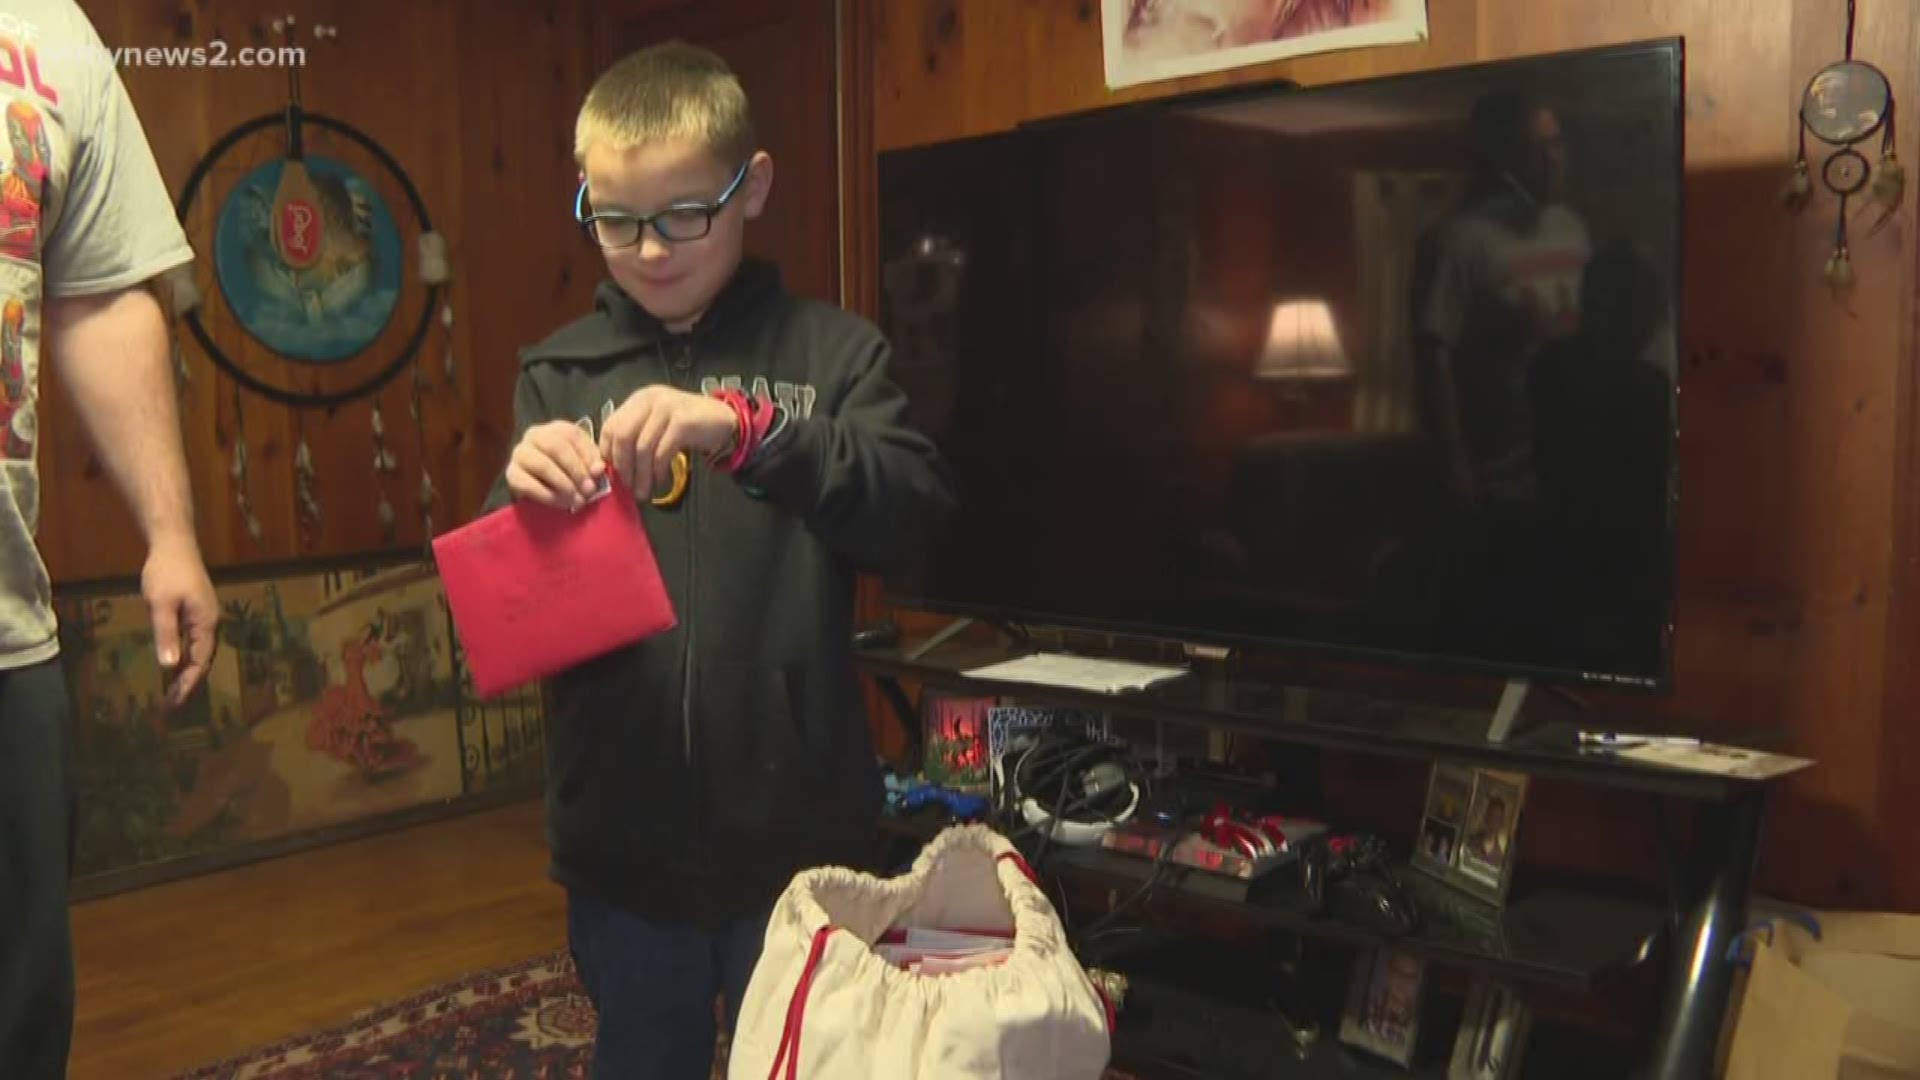 A bag full of cards were delivered to surprise William Sidebottom just one day after his family came home to cards and gifts on their doorstep.